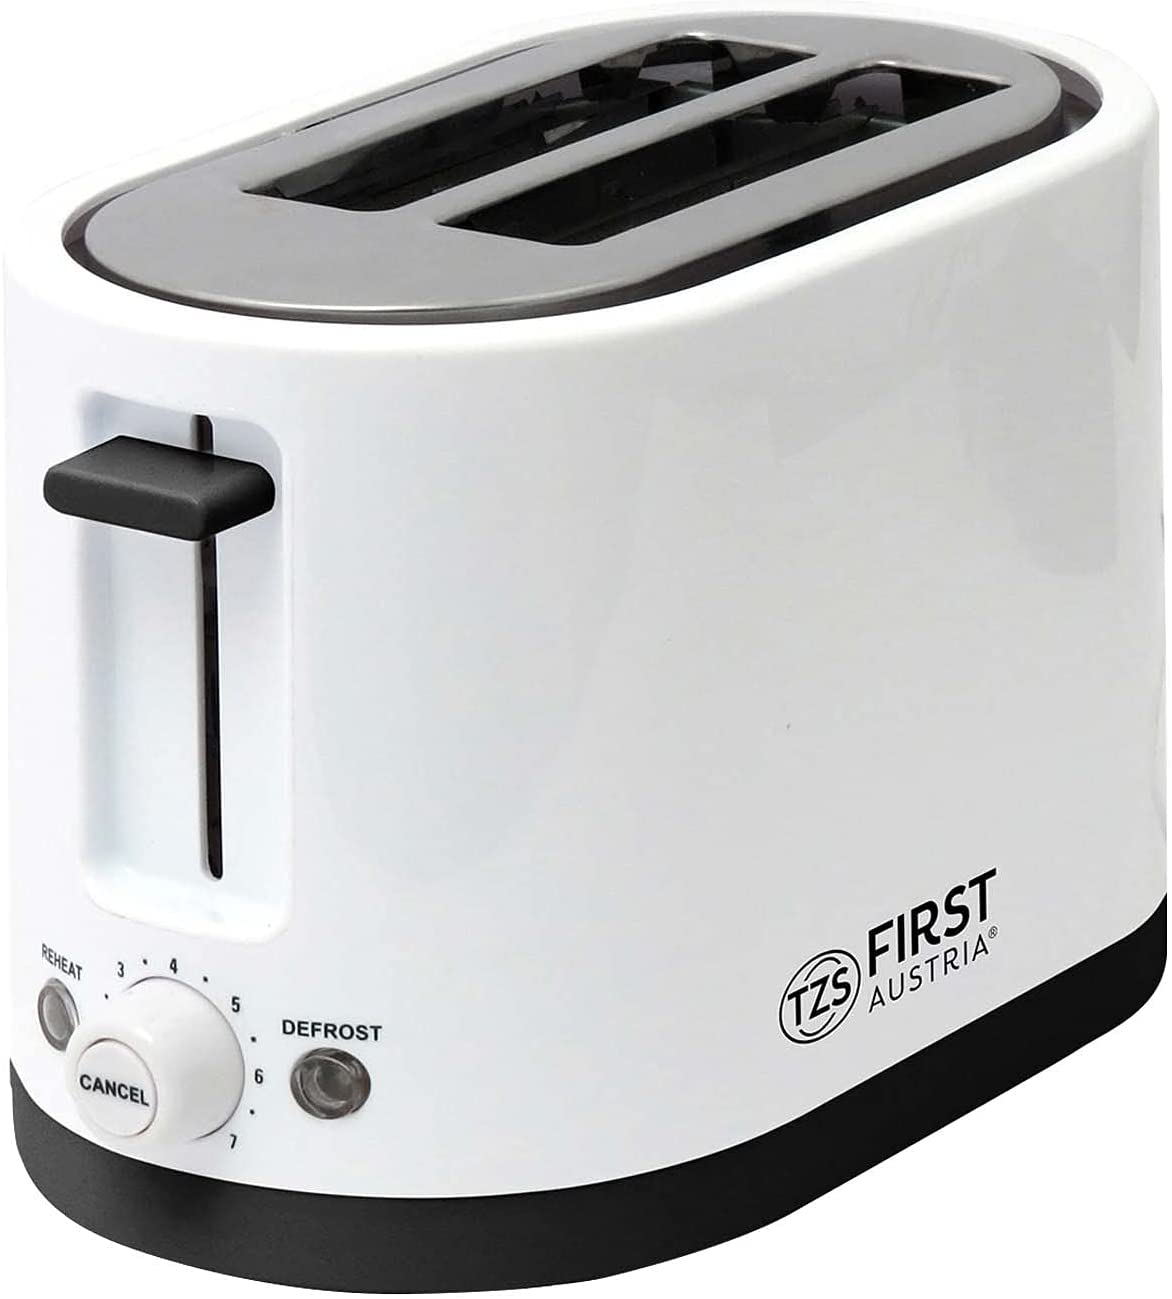 TZS First Austria - 2 Slices Toaster, Cool-Touch Casing, Removable Bun Attachment, Crumb Tray, Sandwich Toast, White